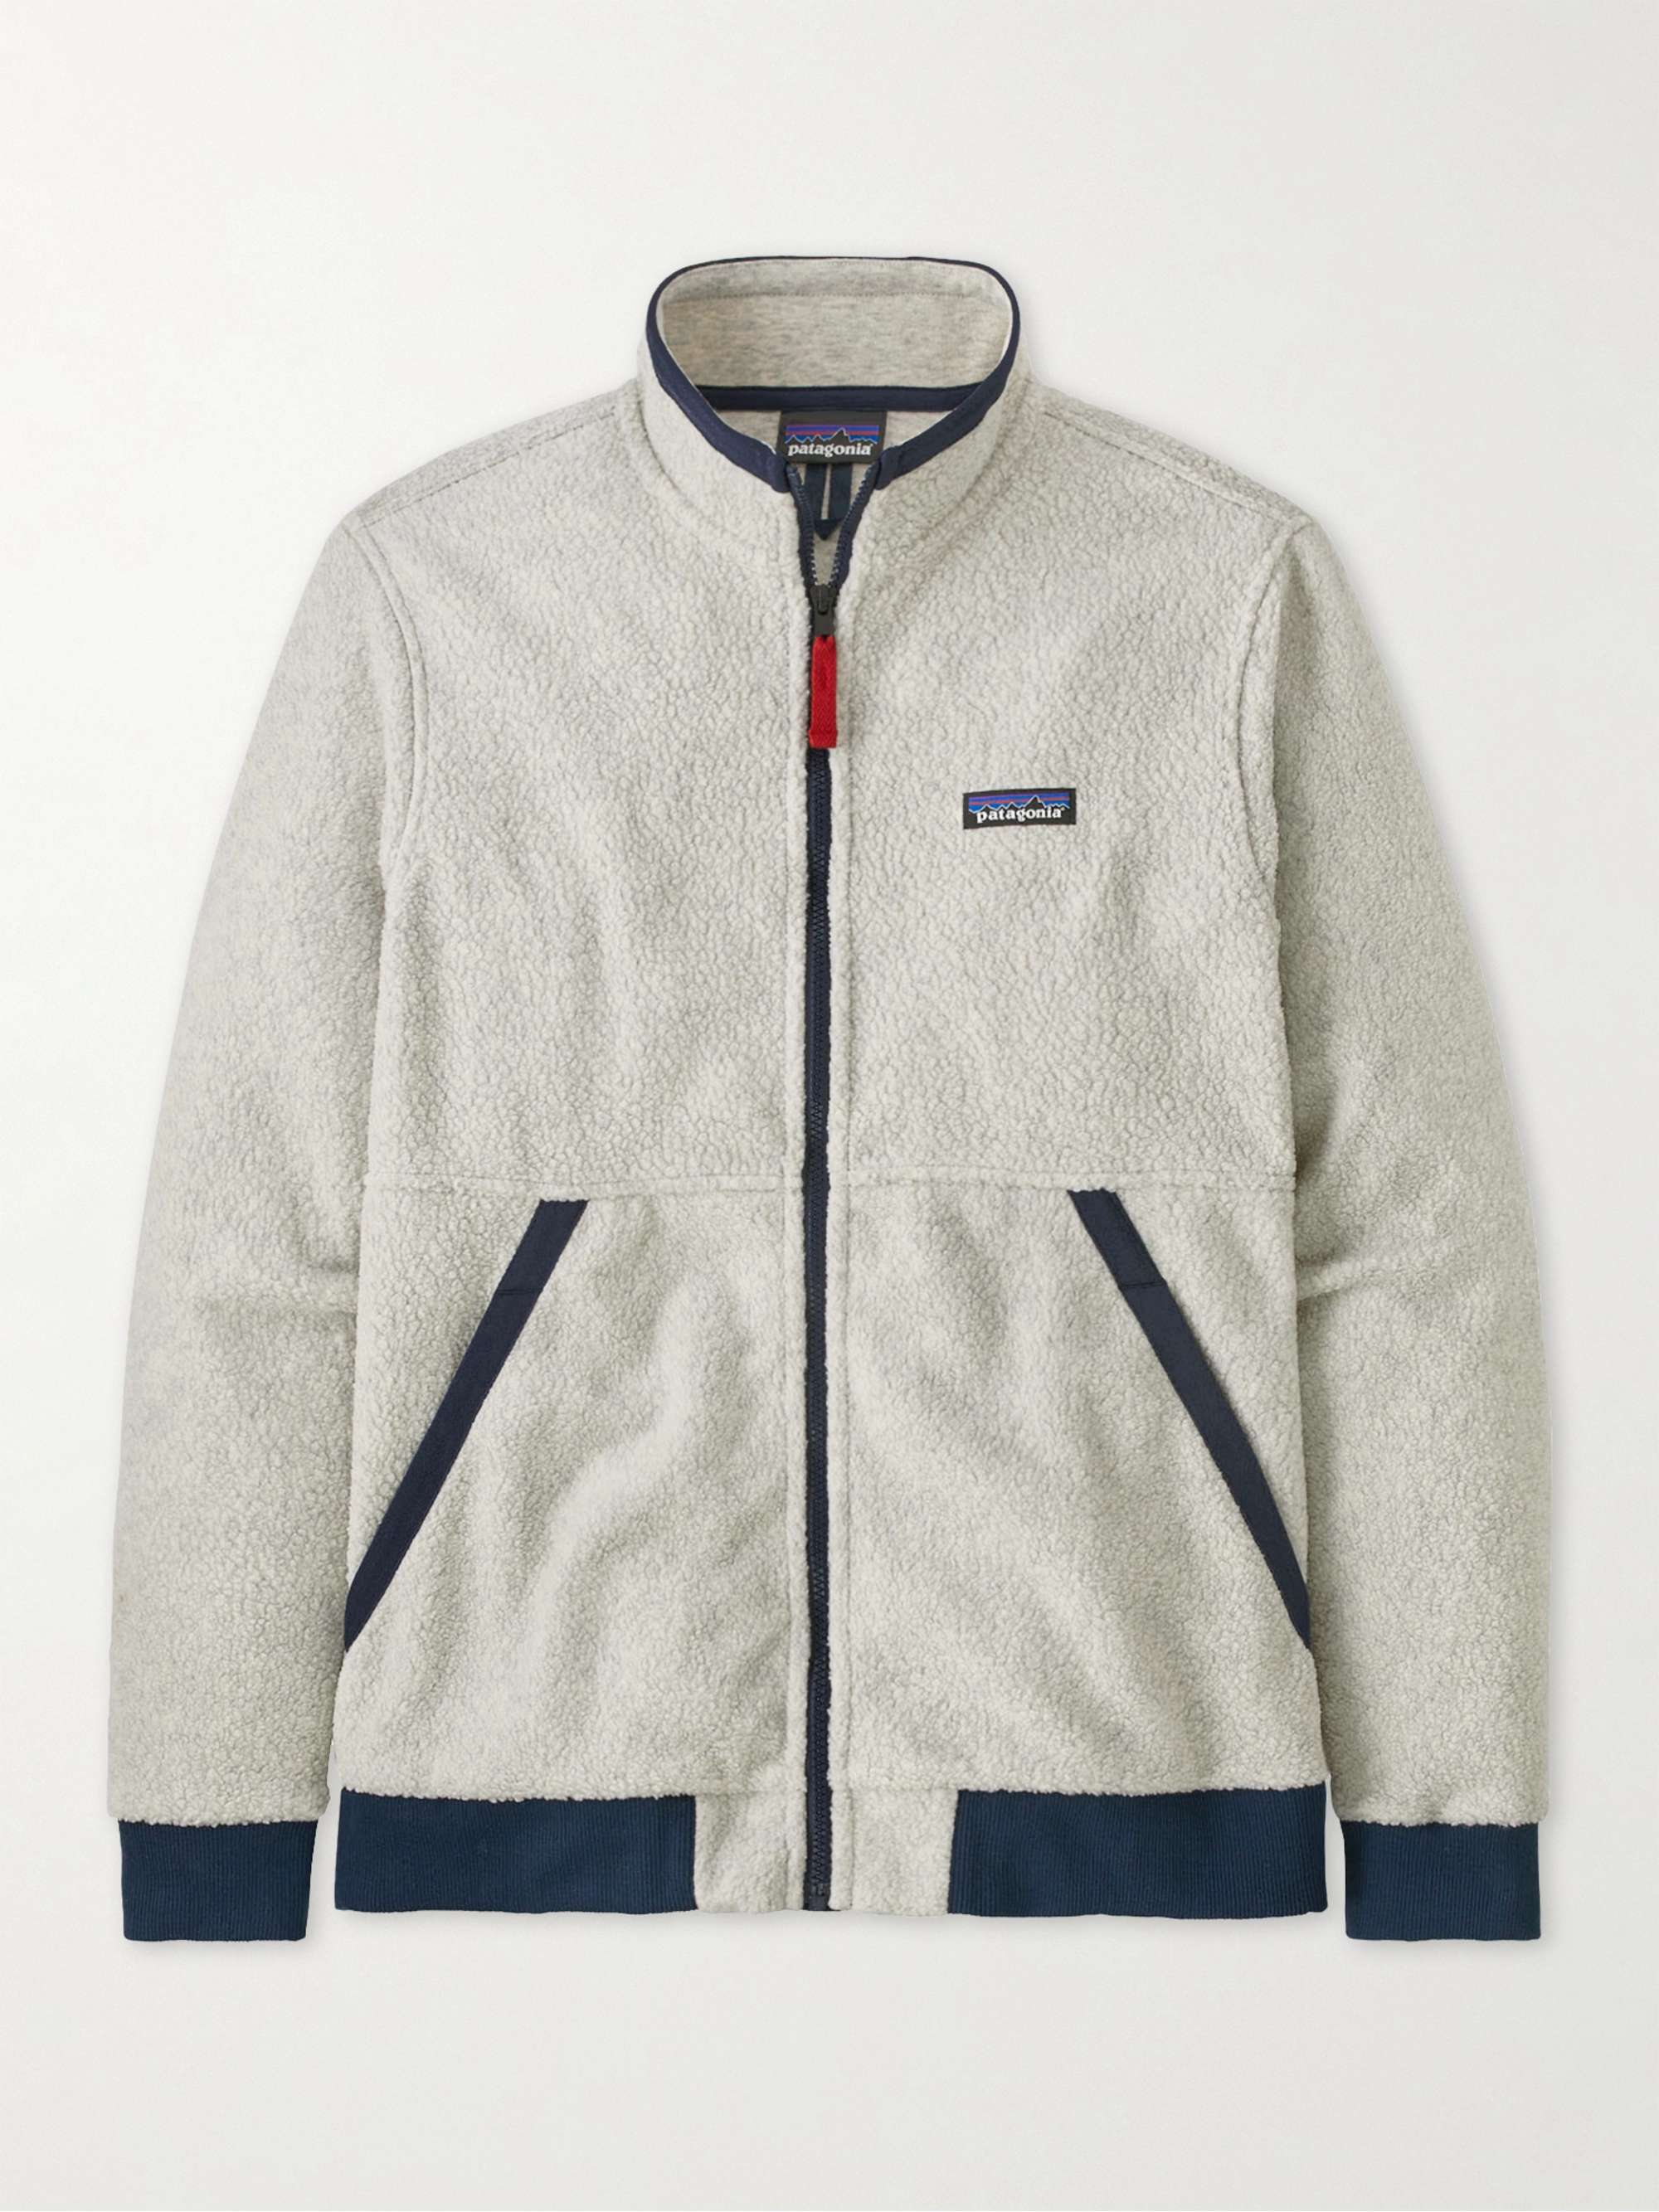 PATAGONIA M's Shell-Trimmed Recycled Fleece Jacket